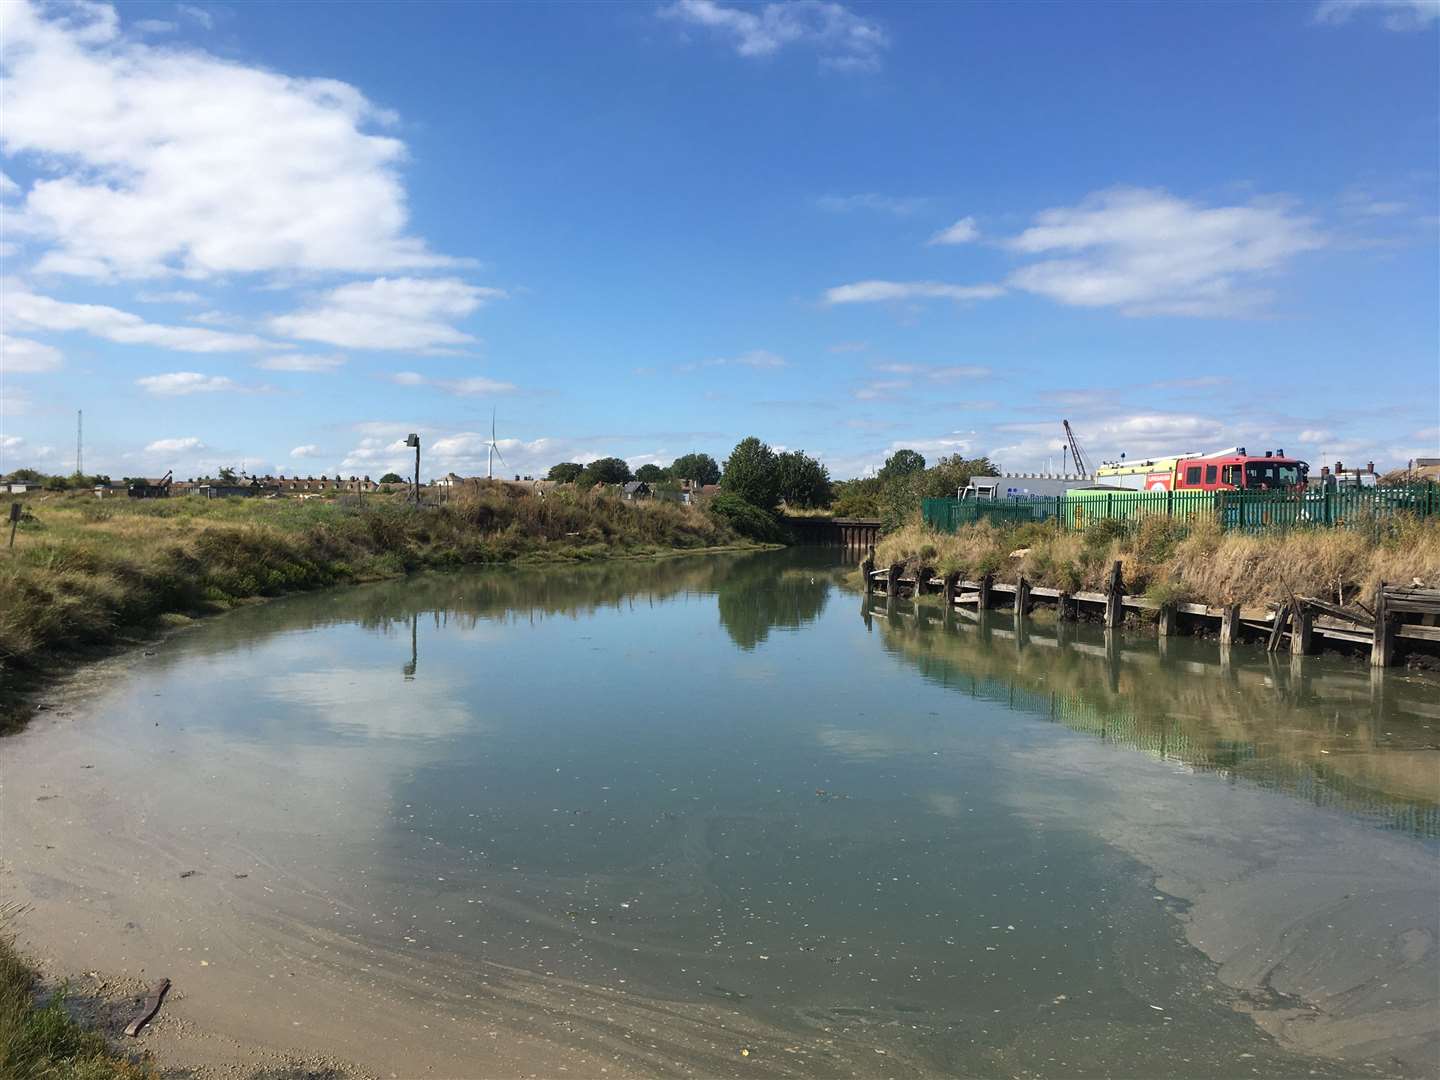 The top of Queenborough Creek which some hope could become part of a marina complex